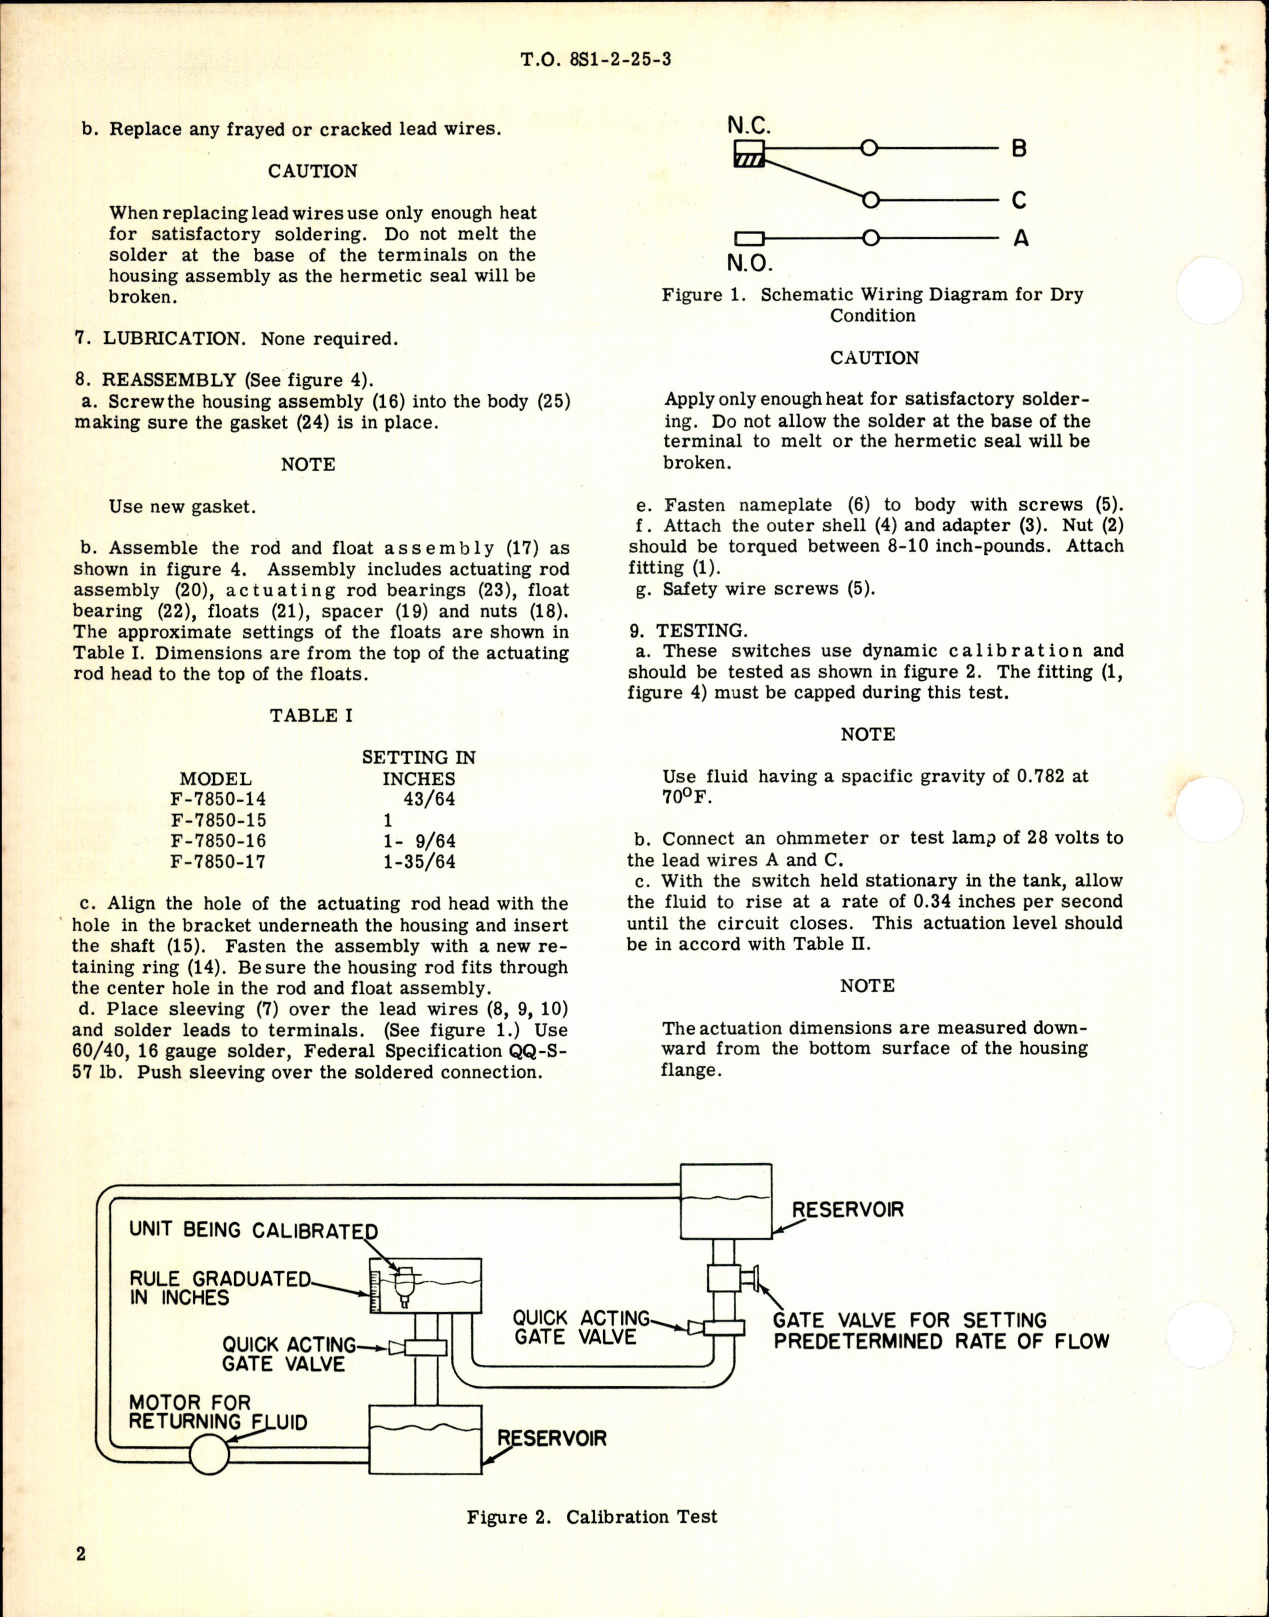 Sample page 2 from AirCorps Library document: Switch Assembly, Fuel Level Control